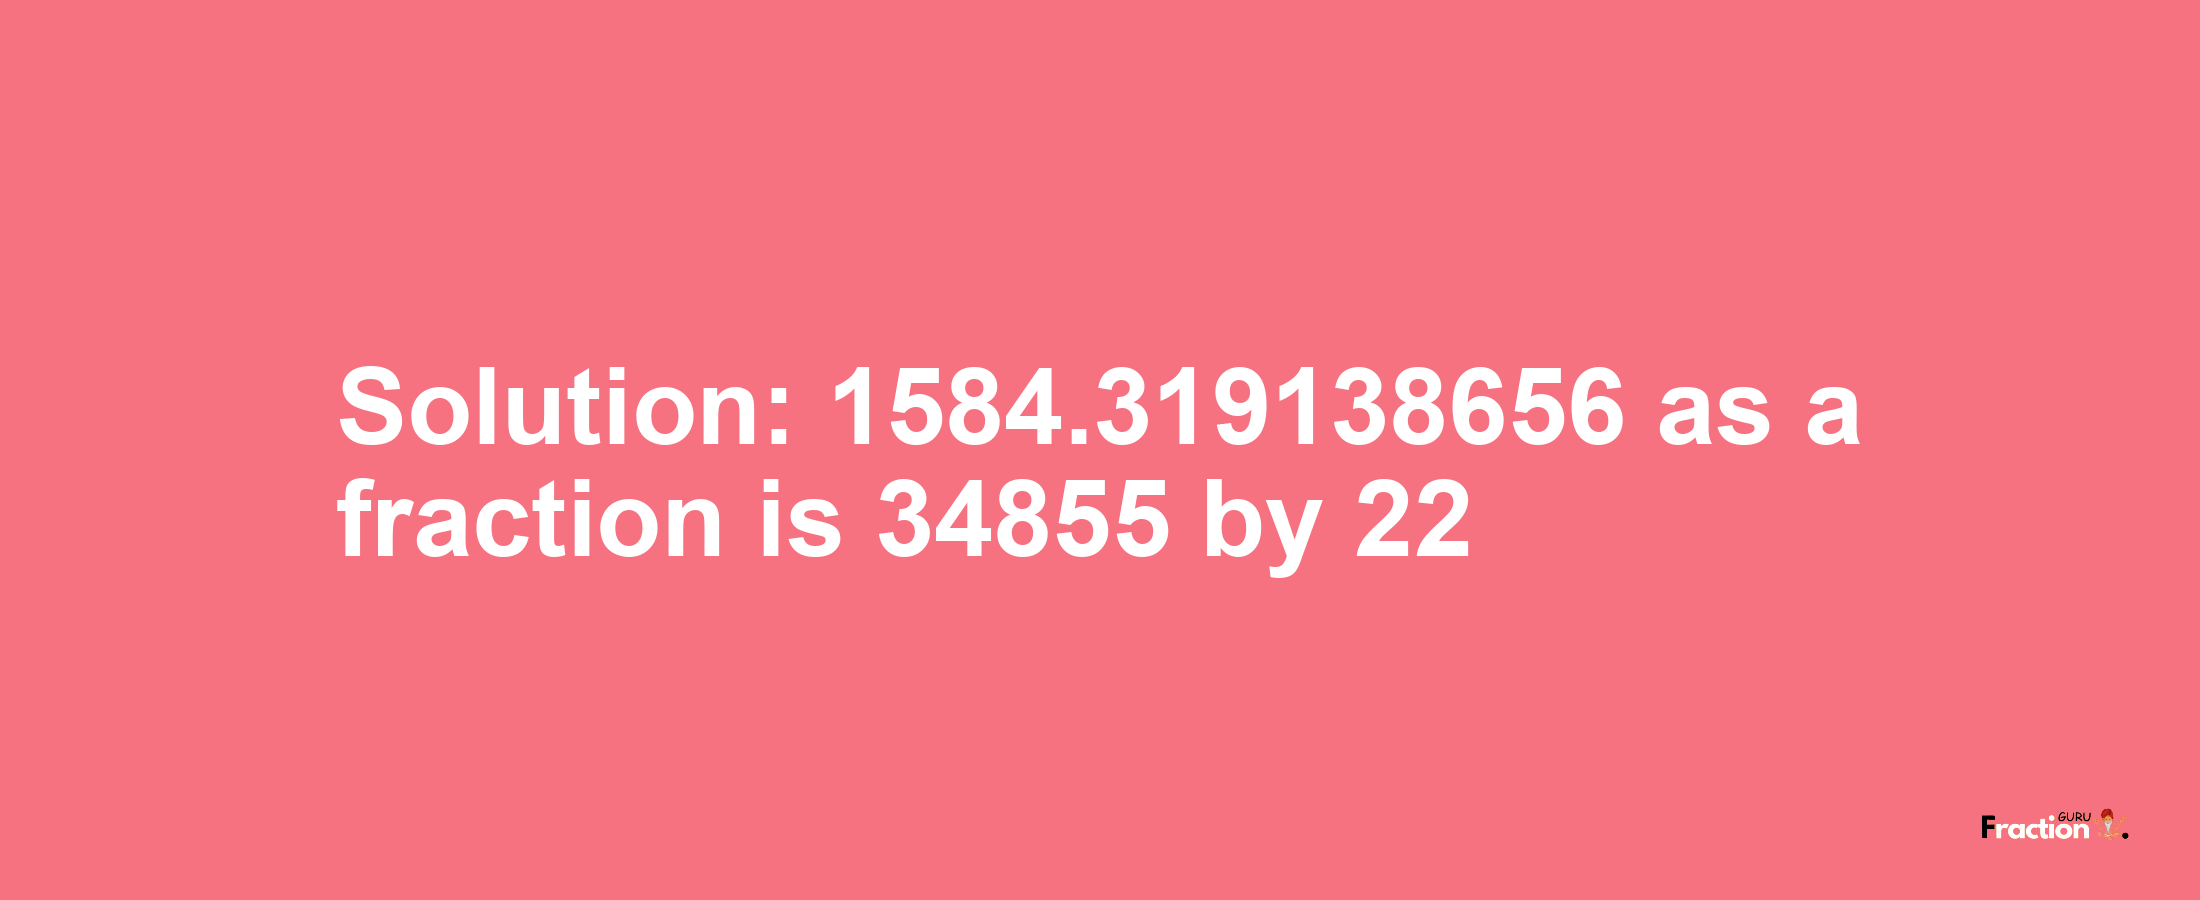 Solution:1584.319138656 as a fraction is 34855/22